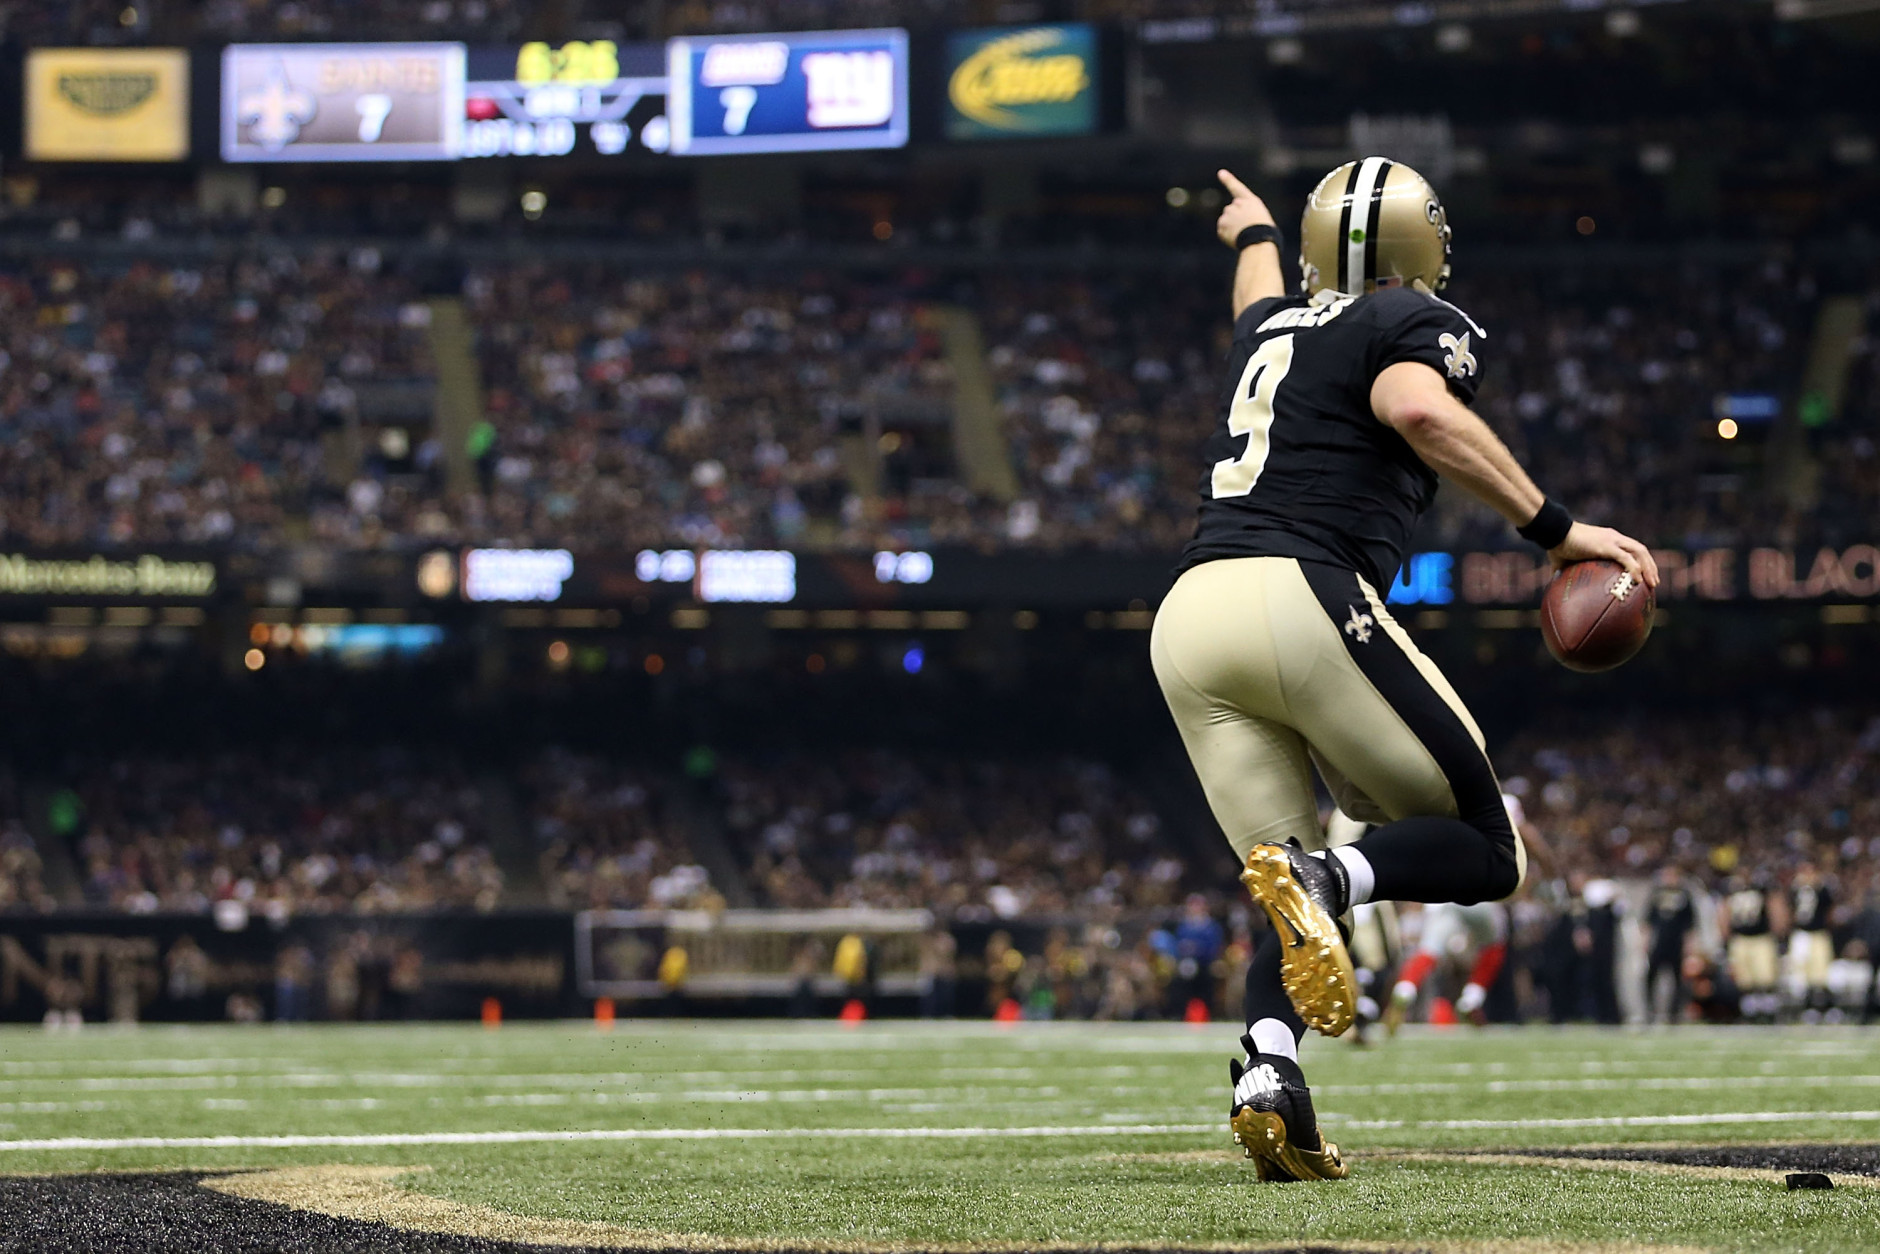 NEW ORLEANS, LA - NOVEMBER 01:  Drew Brees #9 of the New Orleans Saints looks to pass during the first quarter of a game against the New York Giants at the Mercedes-Benz Superdome on November 1, 2015 in New Orleans, Louisiana.  (Photo by Chris Graythen/Getty Images)